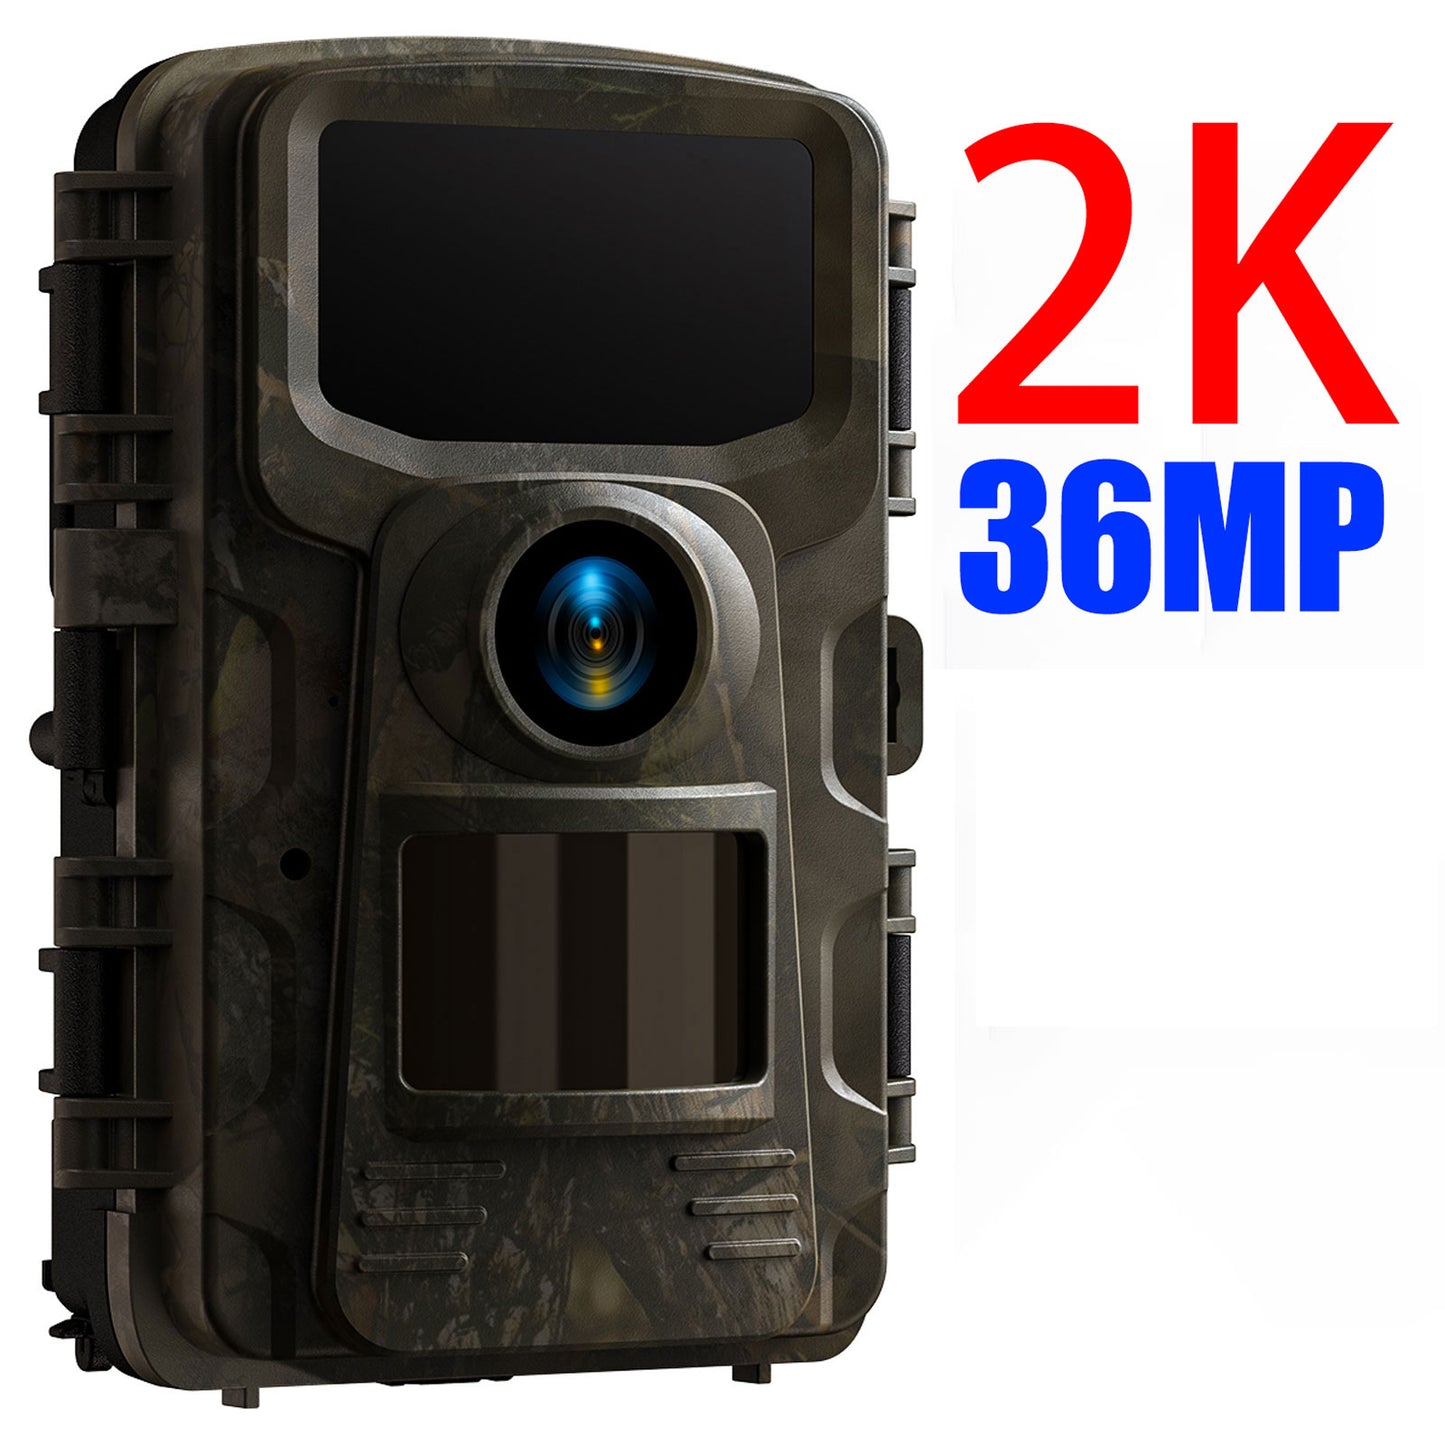 CAMPARK Trail Camera 2K 36MP Game Camera with Infrared Night Vision Waterproof 65FT Motion Activated Wildlife Scouting Hunting Deer Trail Cam with 120° Wide Angle Lens 2.0"LCD